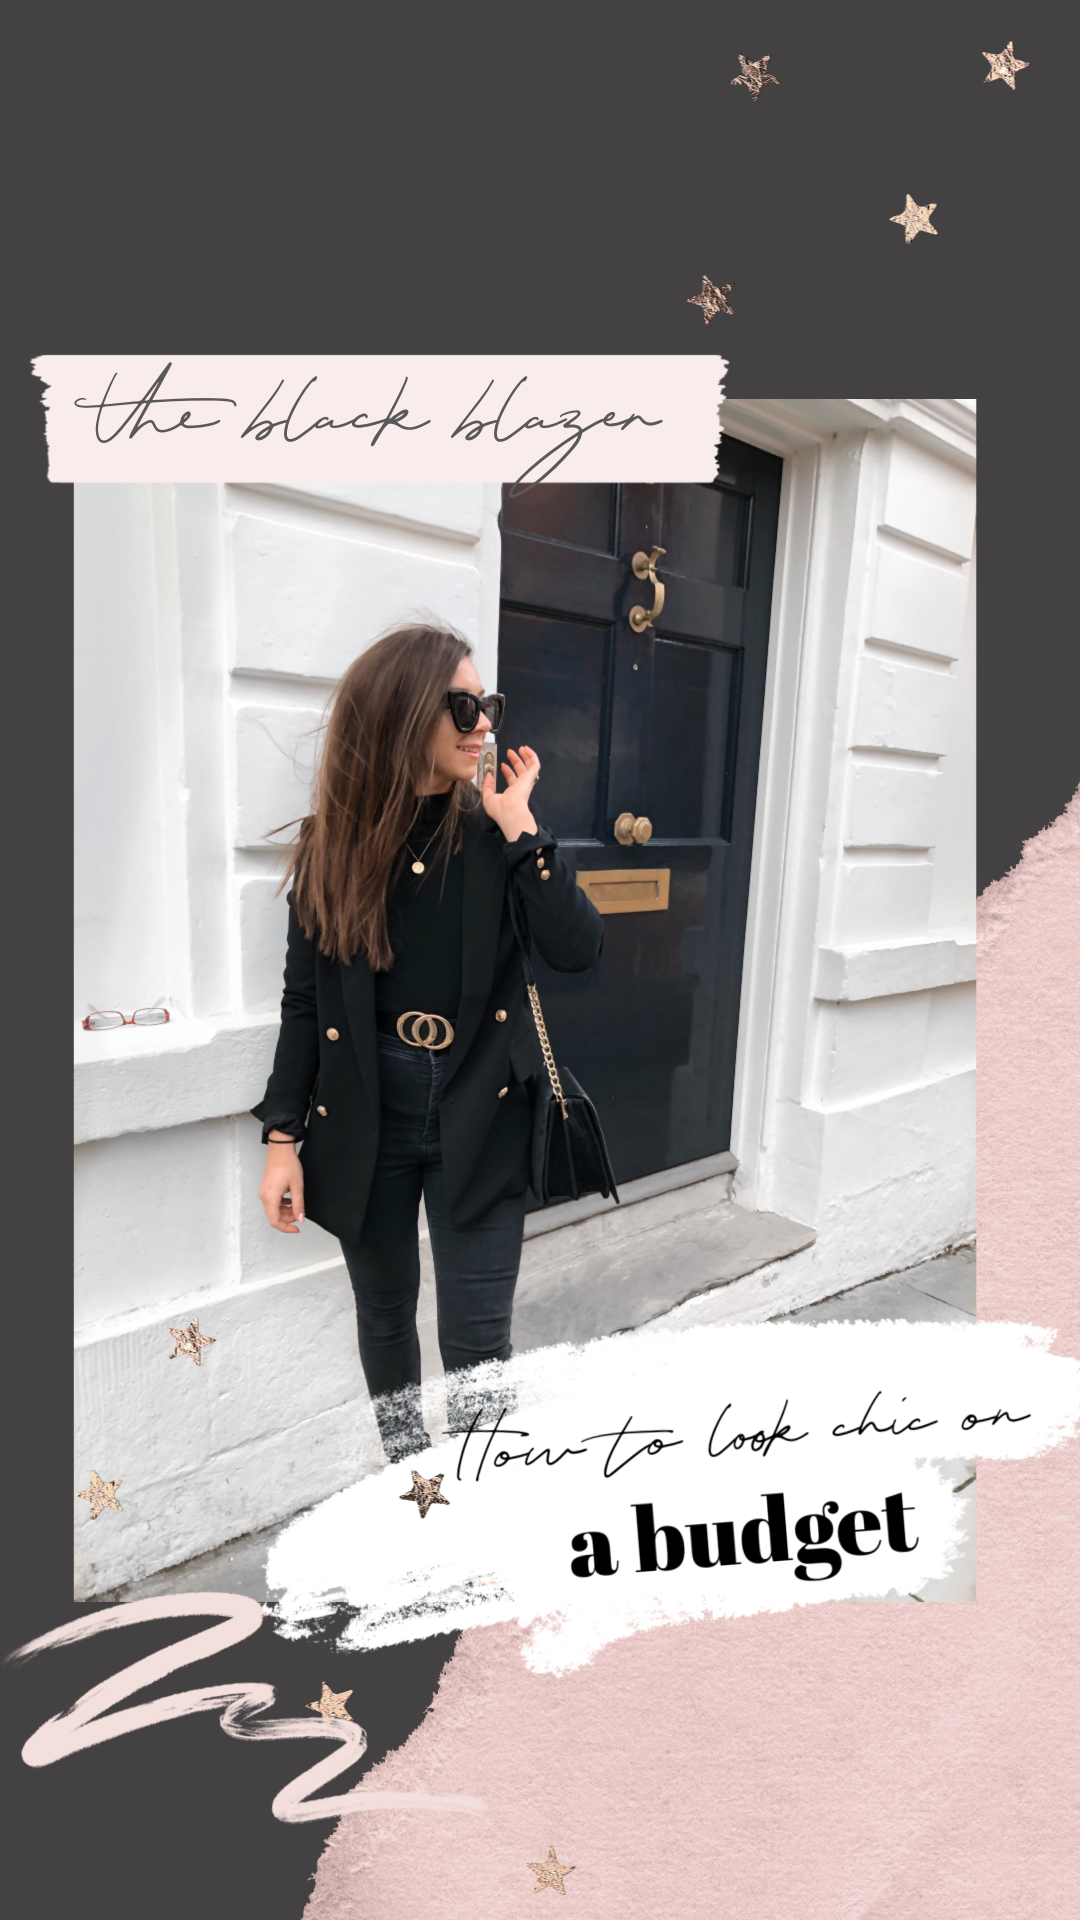 how to look chic on a budget, chic, black blazer, outfit, outfit inspo, dizzybrunette3, fashion,